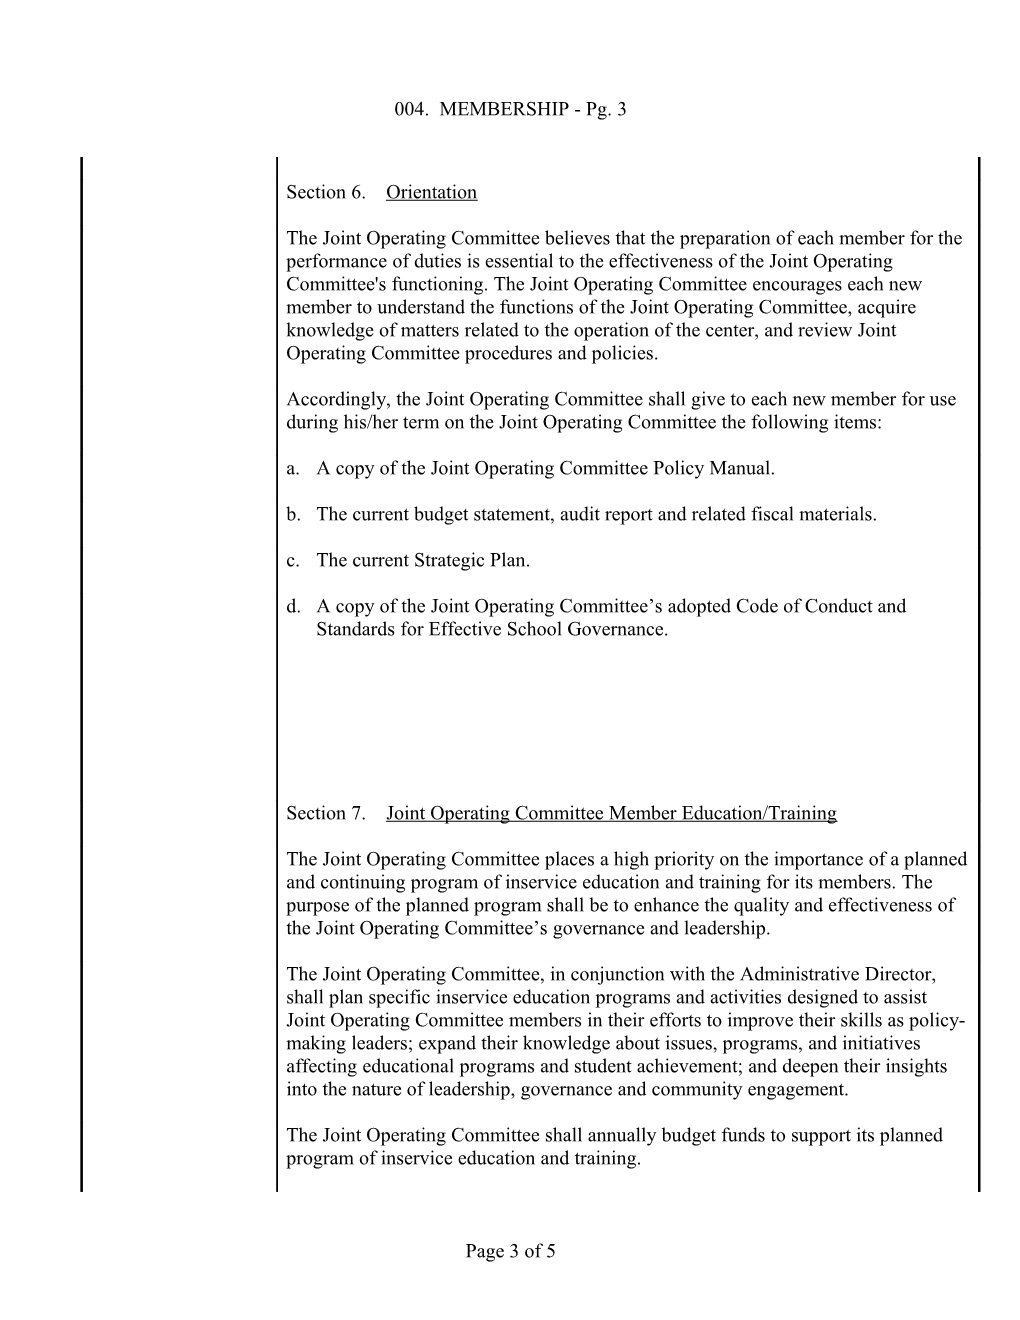 A Copy of the Joint Operating Committee Policy Manual